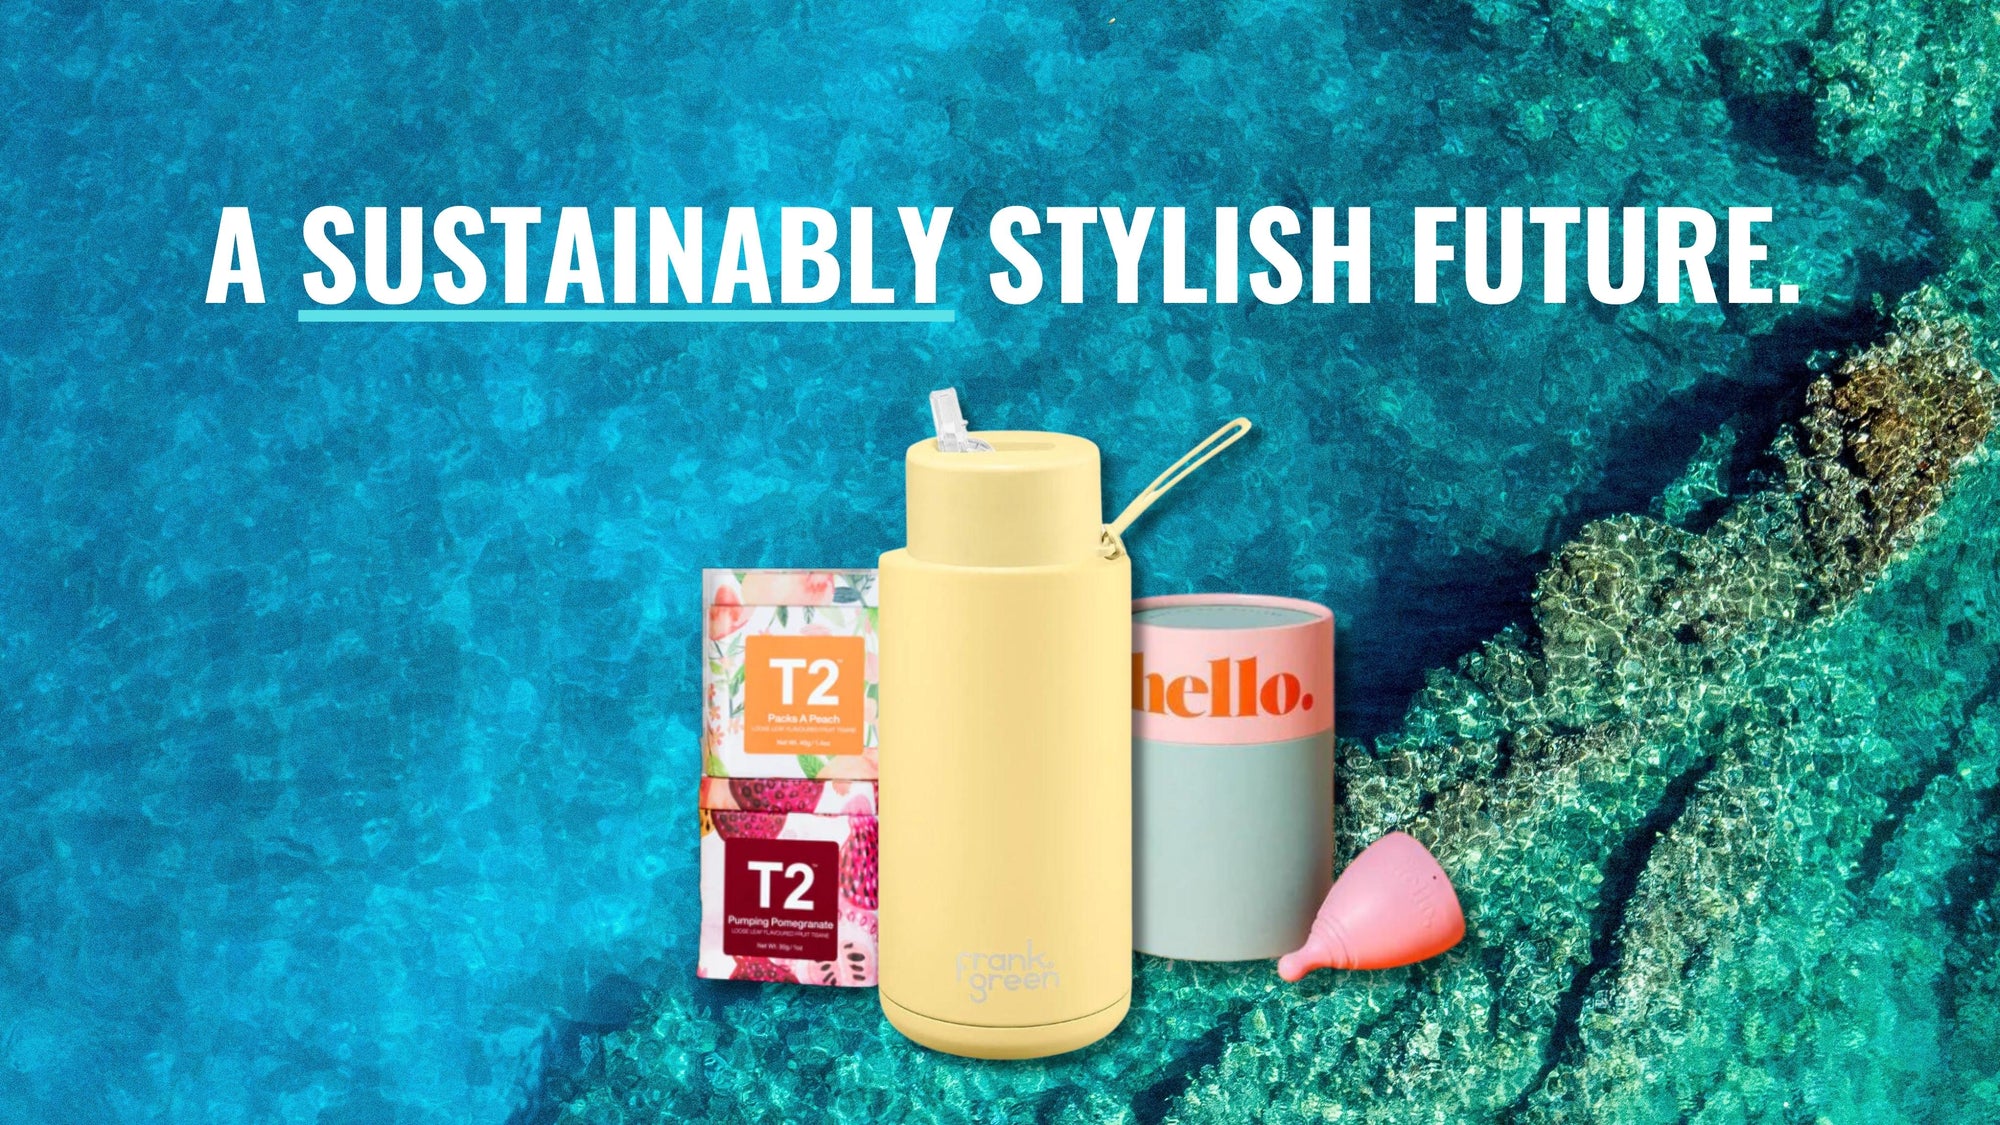 Overhead view of a pristine coral reef. Image bears the heading: A Sustainably Stylish Future. At the base of the image is a reusable drink bottle, tea from T2 and a reusable menstrual cup.